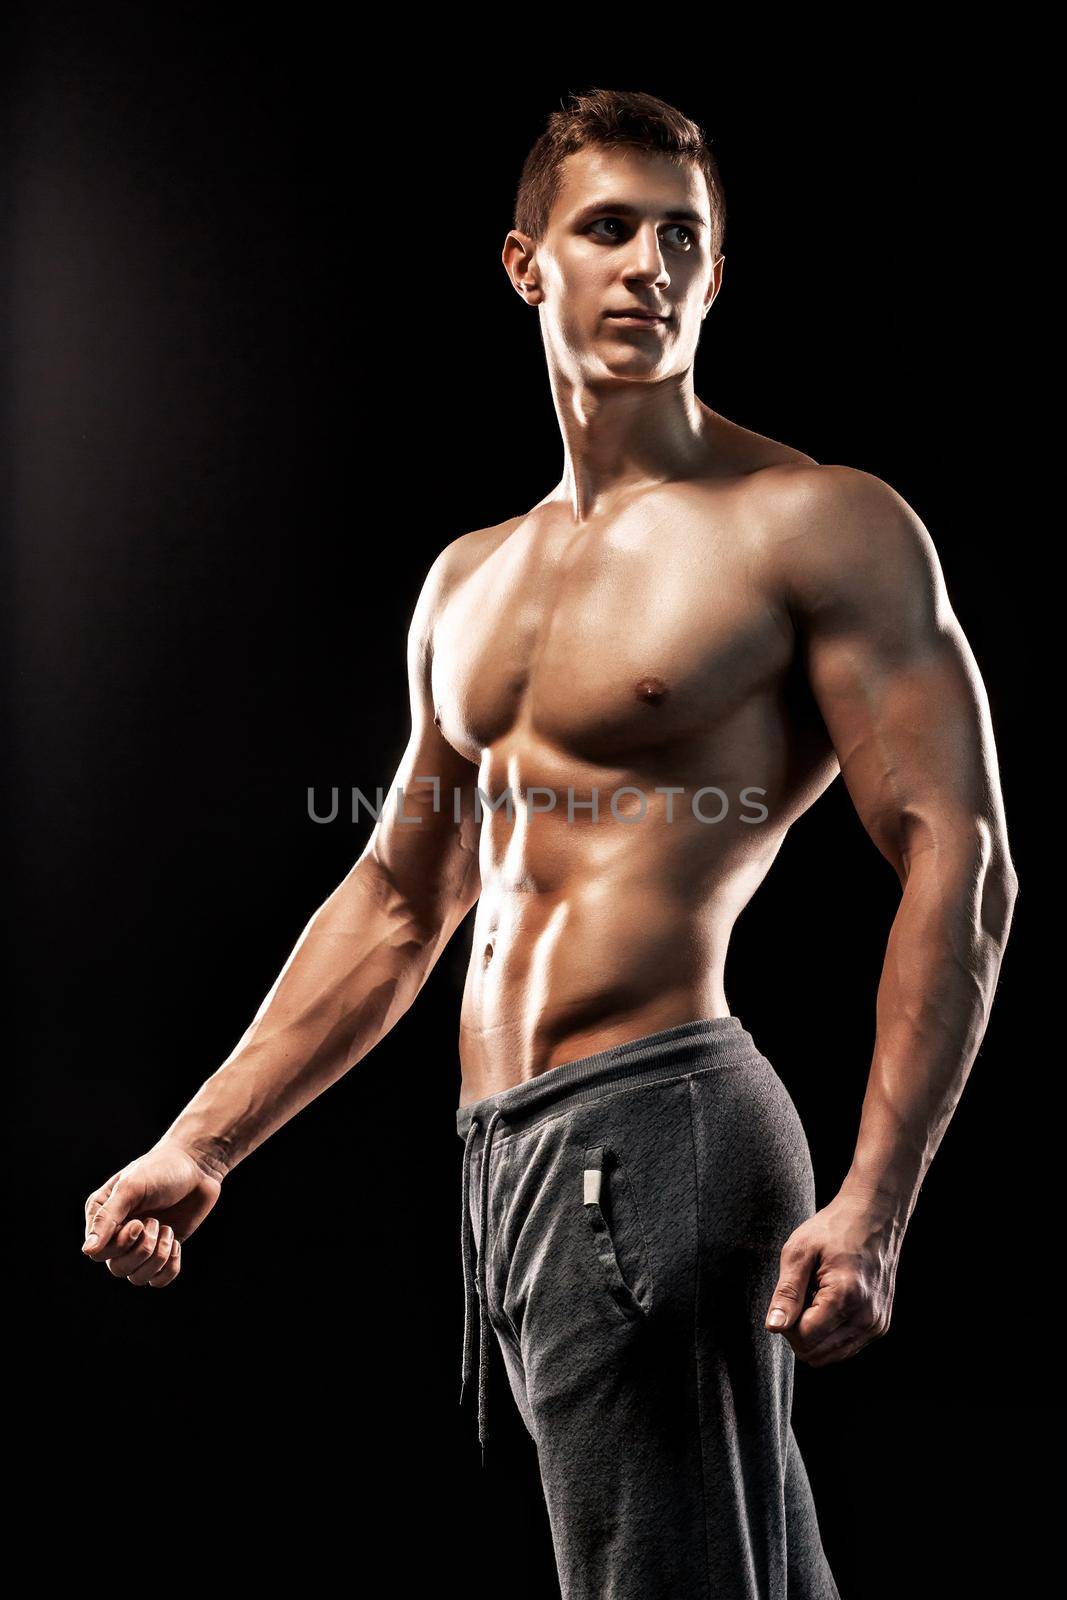 Image of very muscular man posing with naked torso in studio and looking behind on black background.